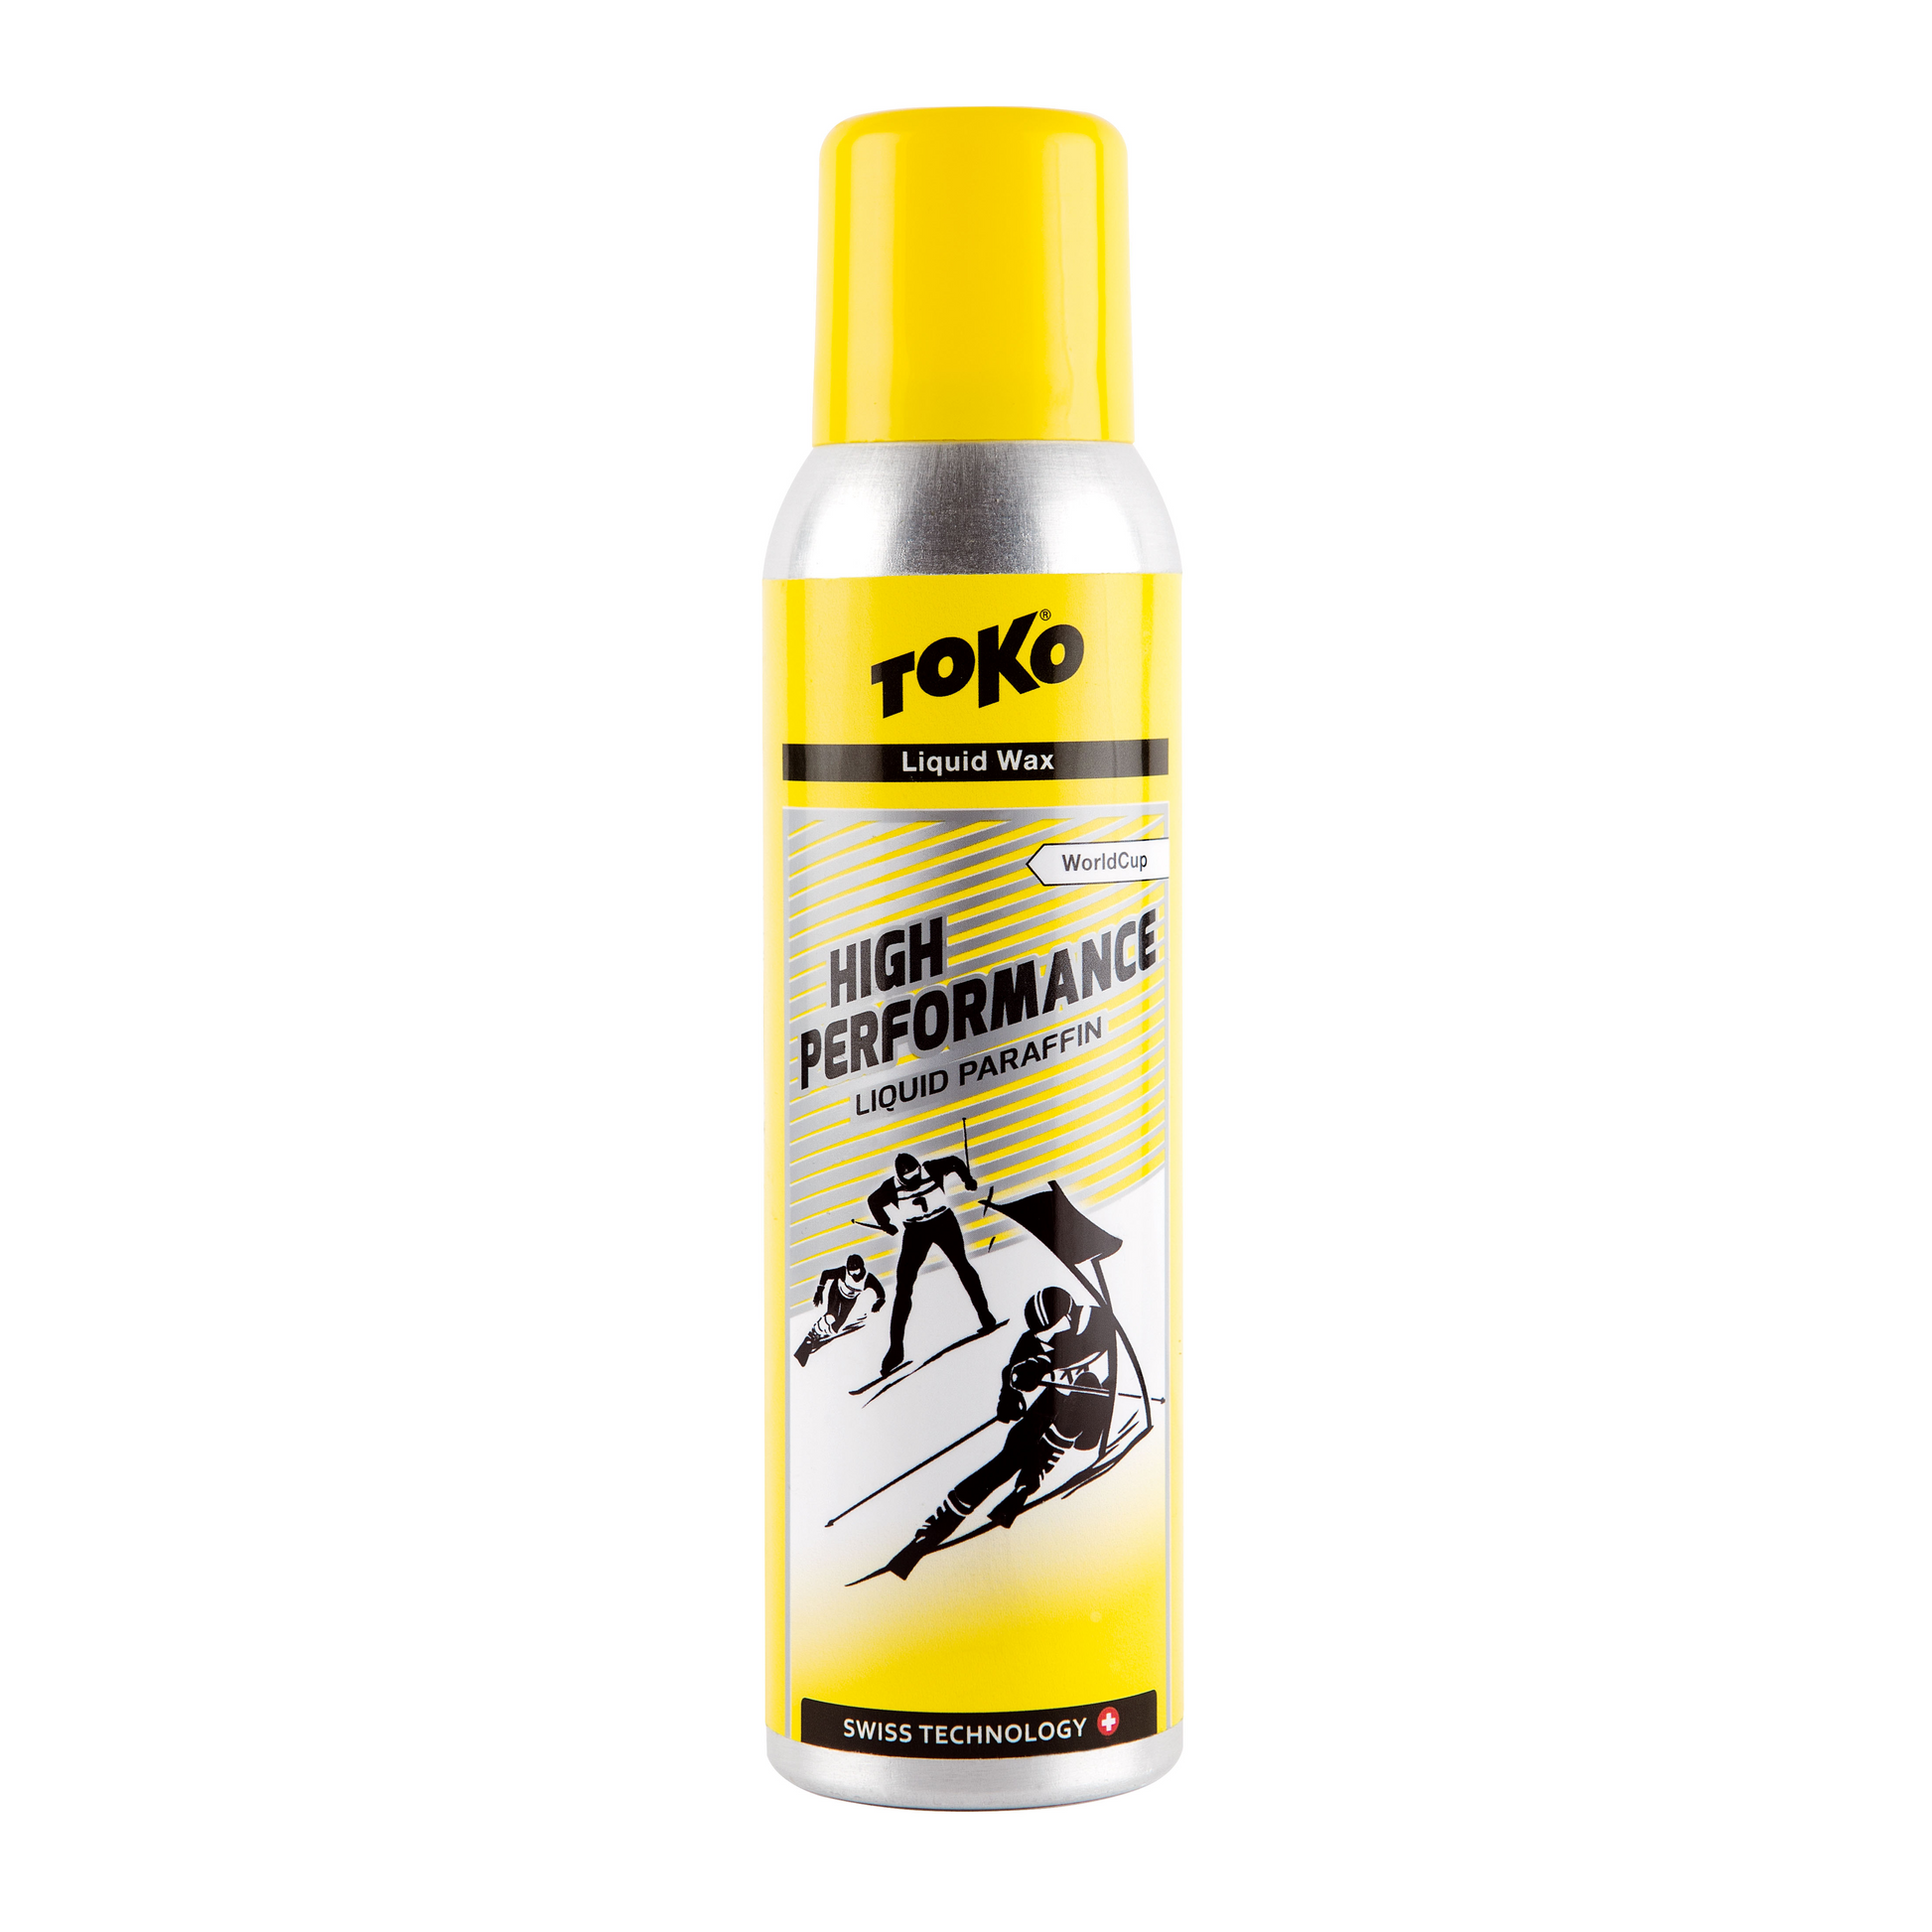 A product picture of the Toko High Performance Liquid Paraffin Yellow